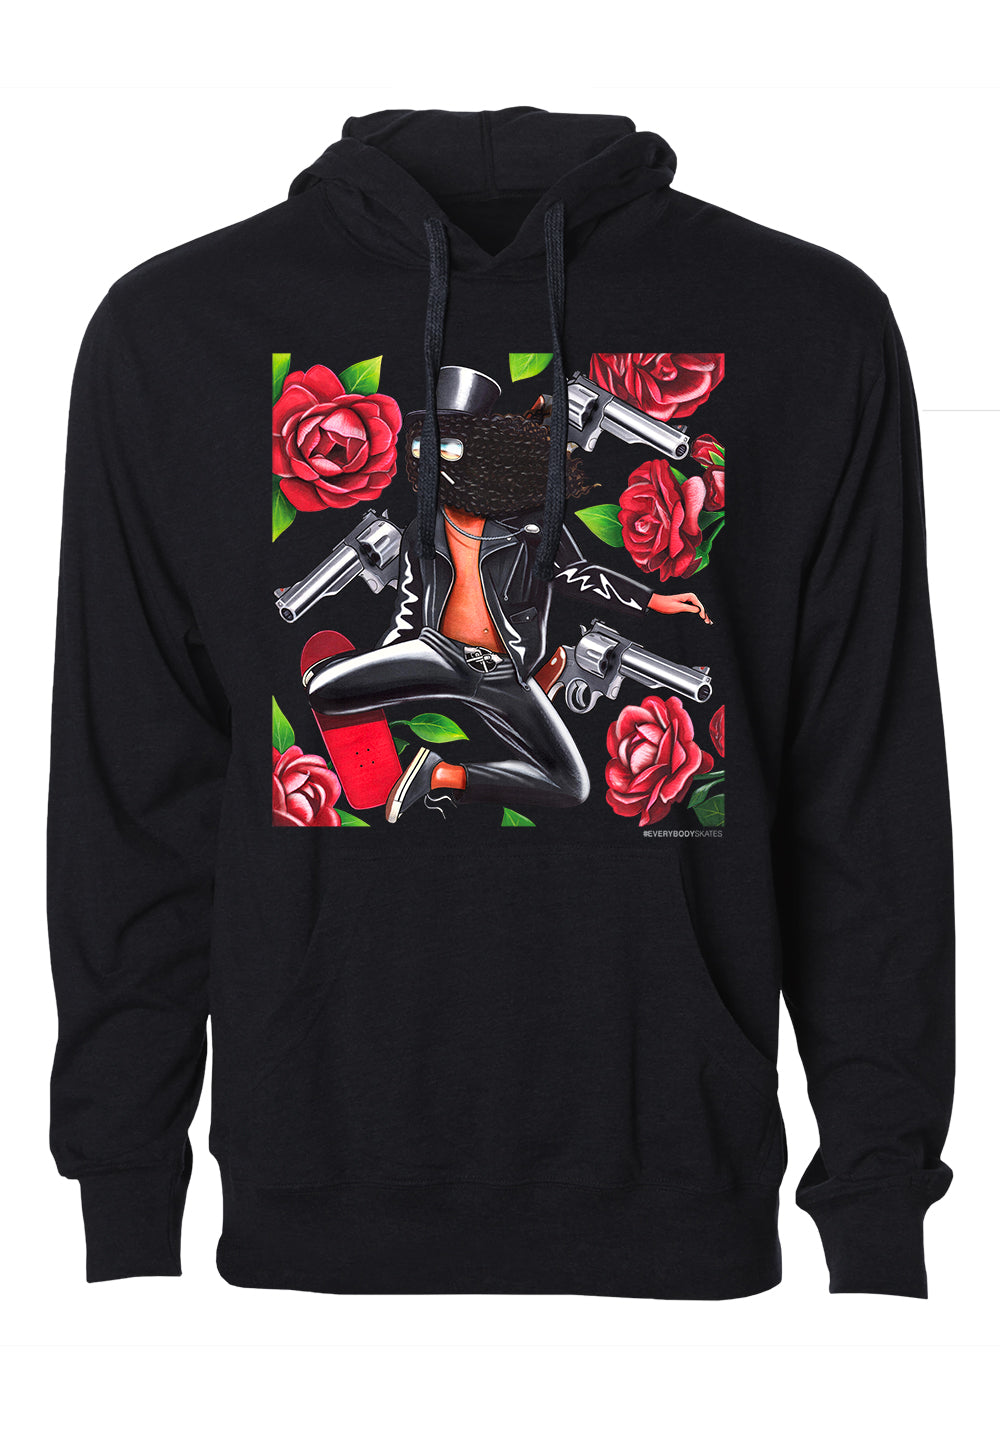 Gats and Flowers Graphic Hoodie